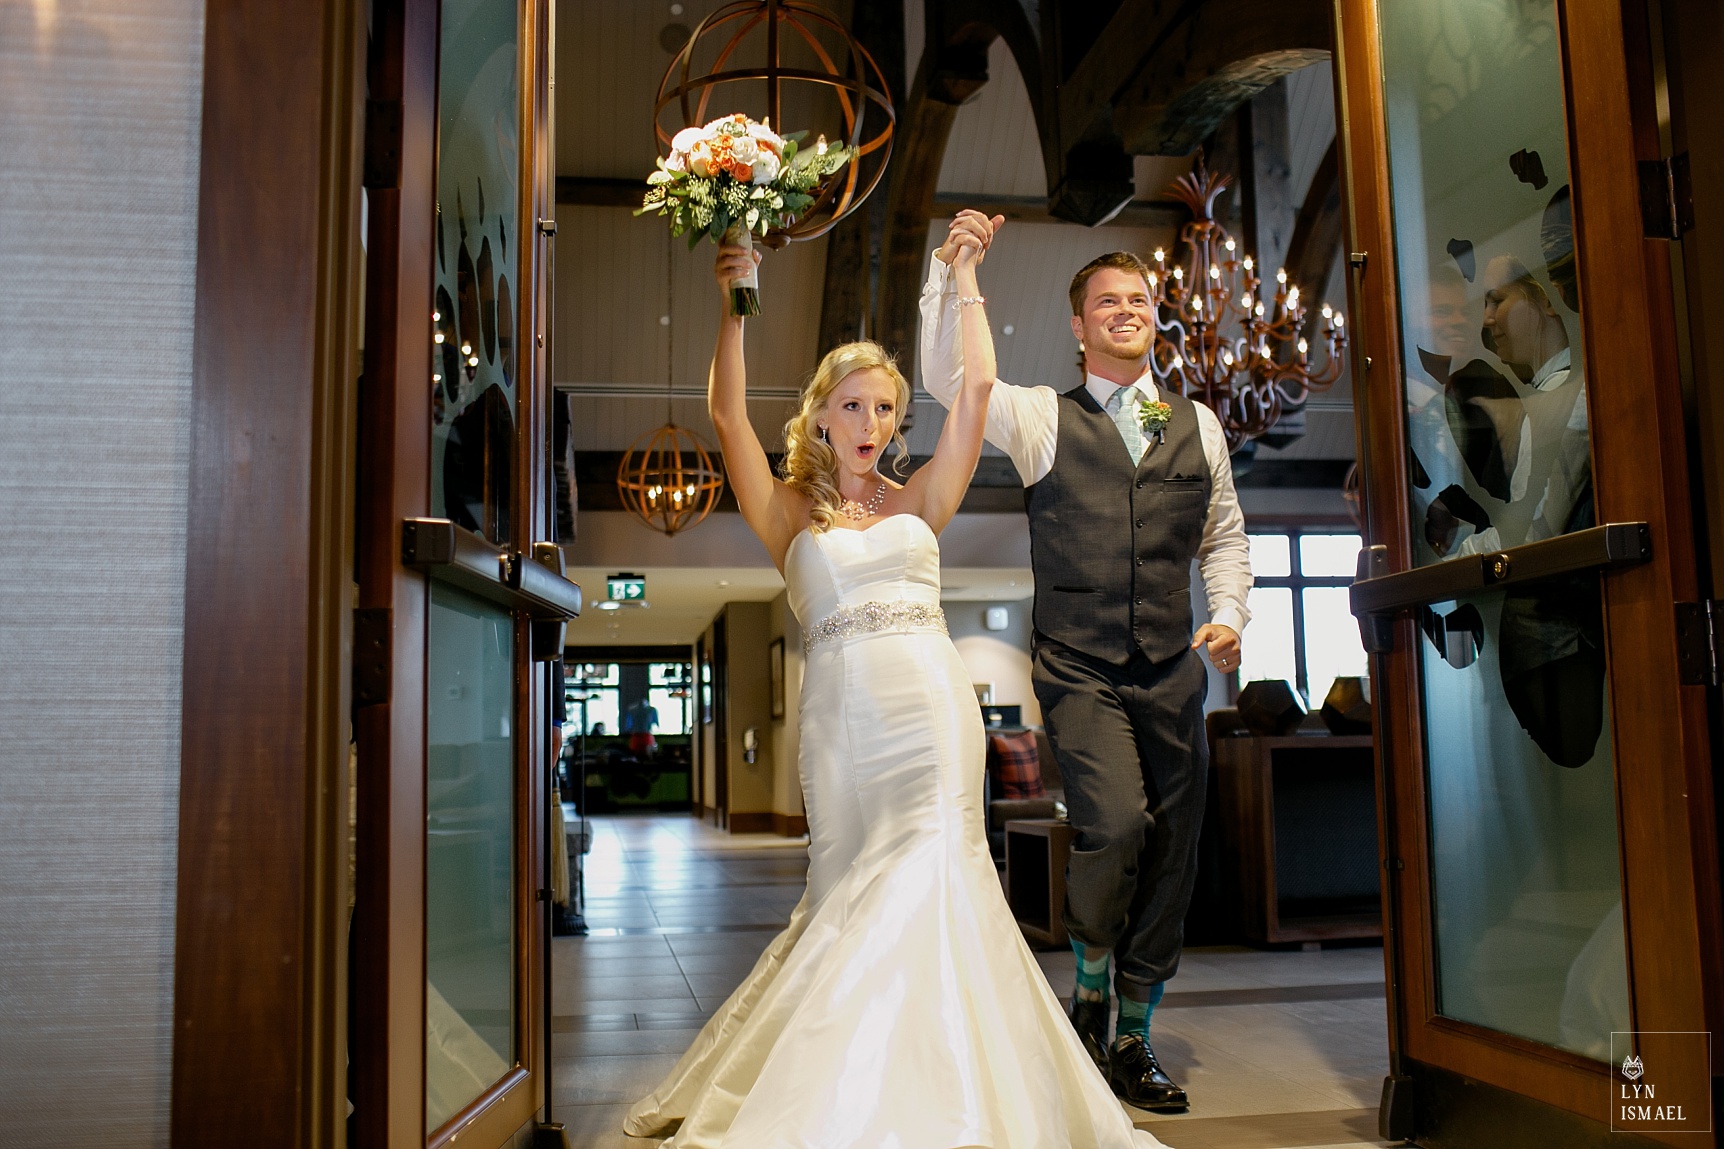 The bride and groom enters the Fall's Room at Whistle Bear Golf Club